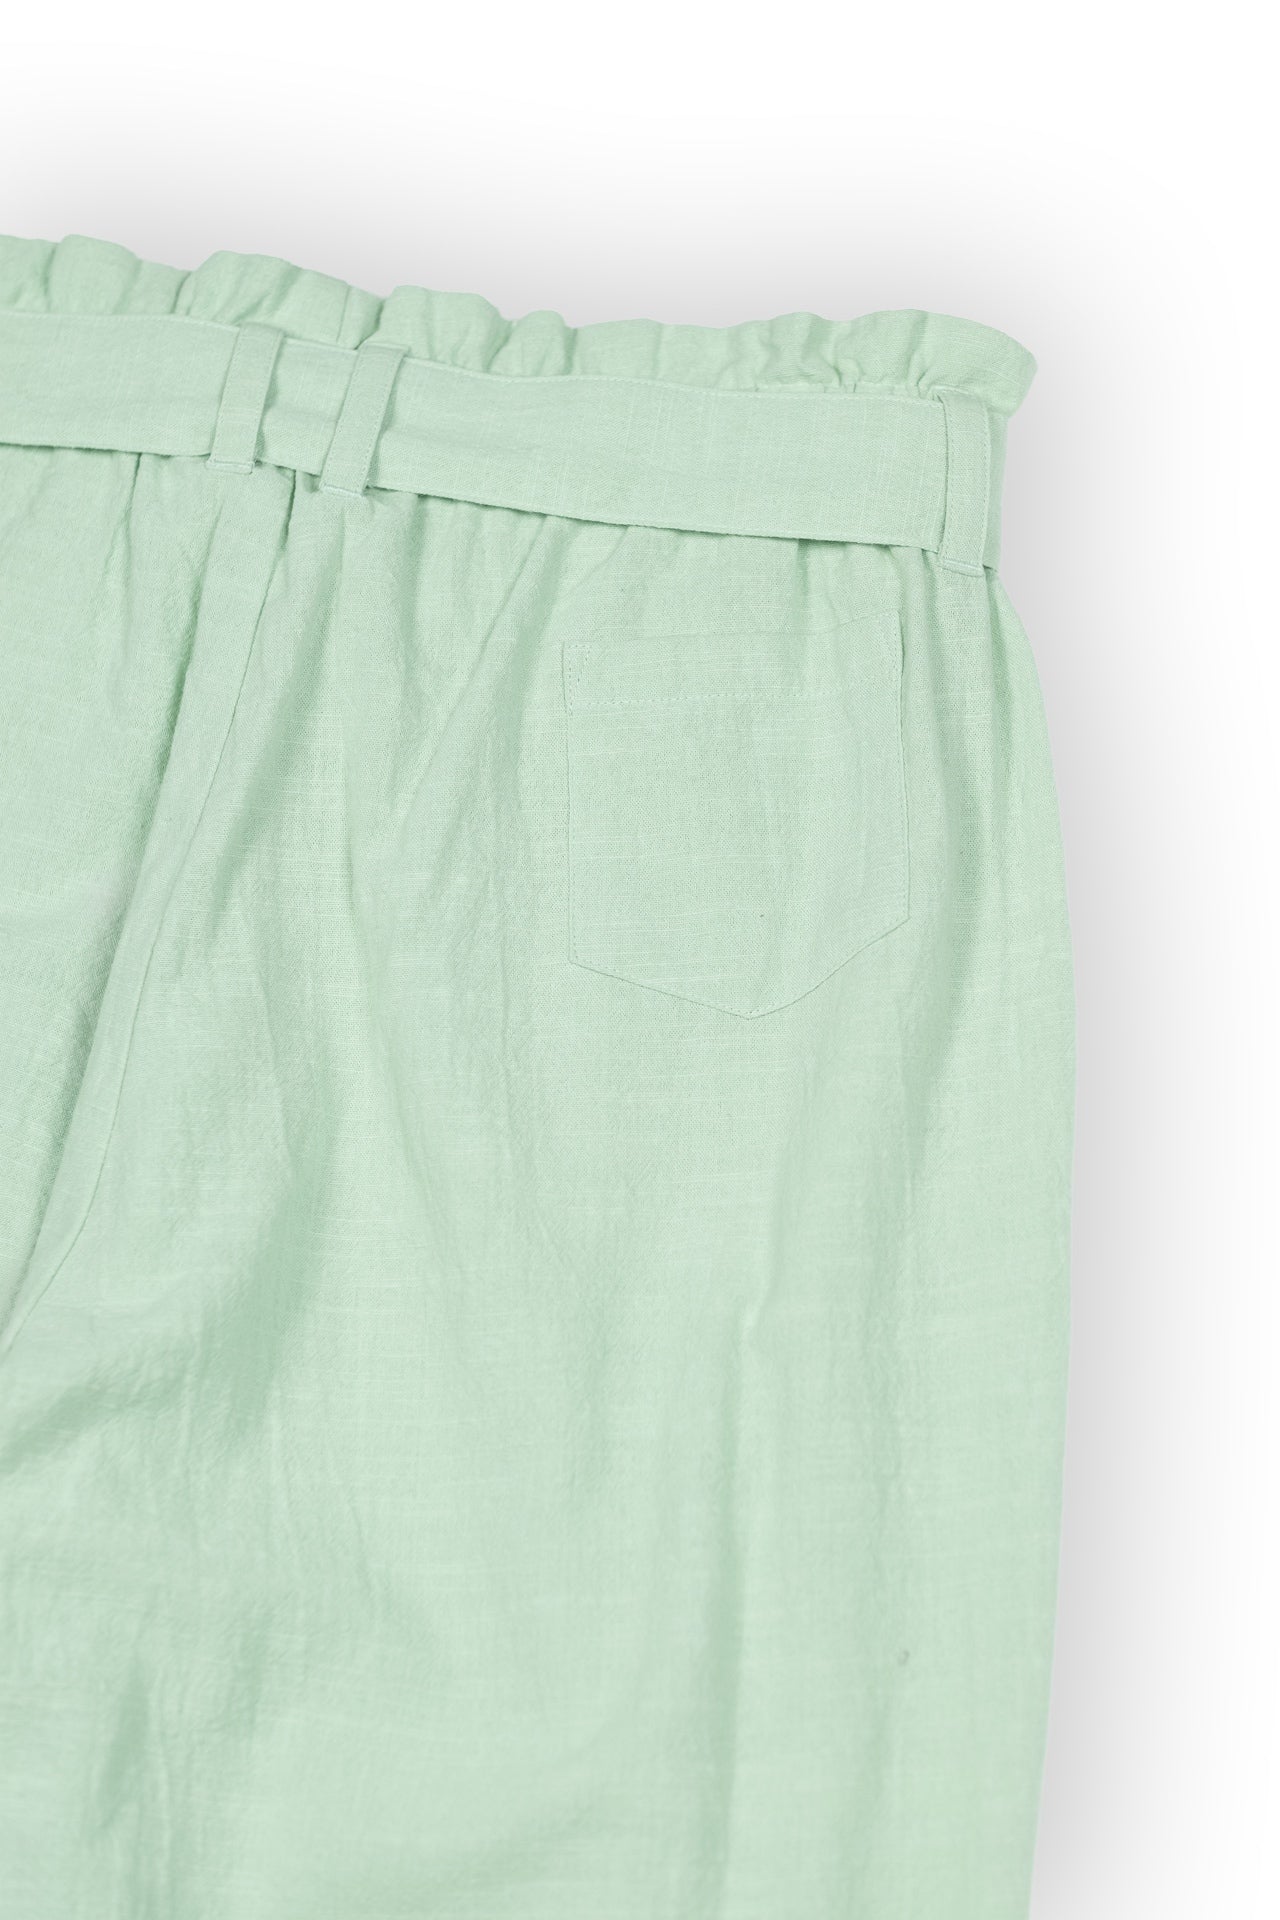 Layla Green Trouser - Rupert and Buckley - Trousers